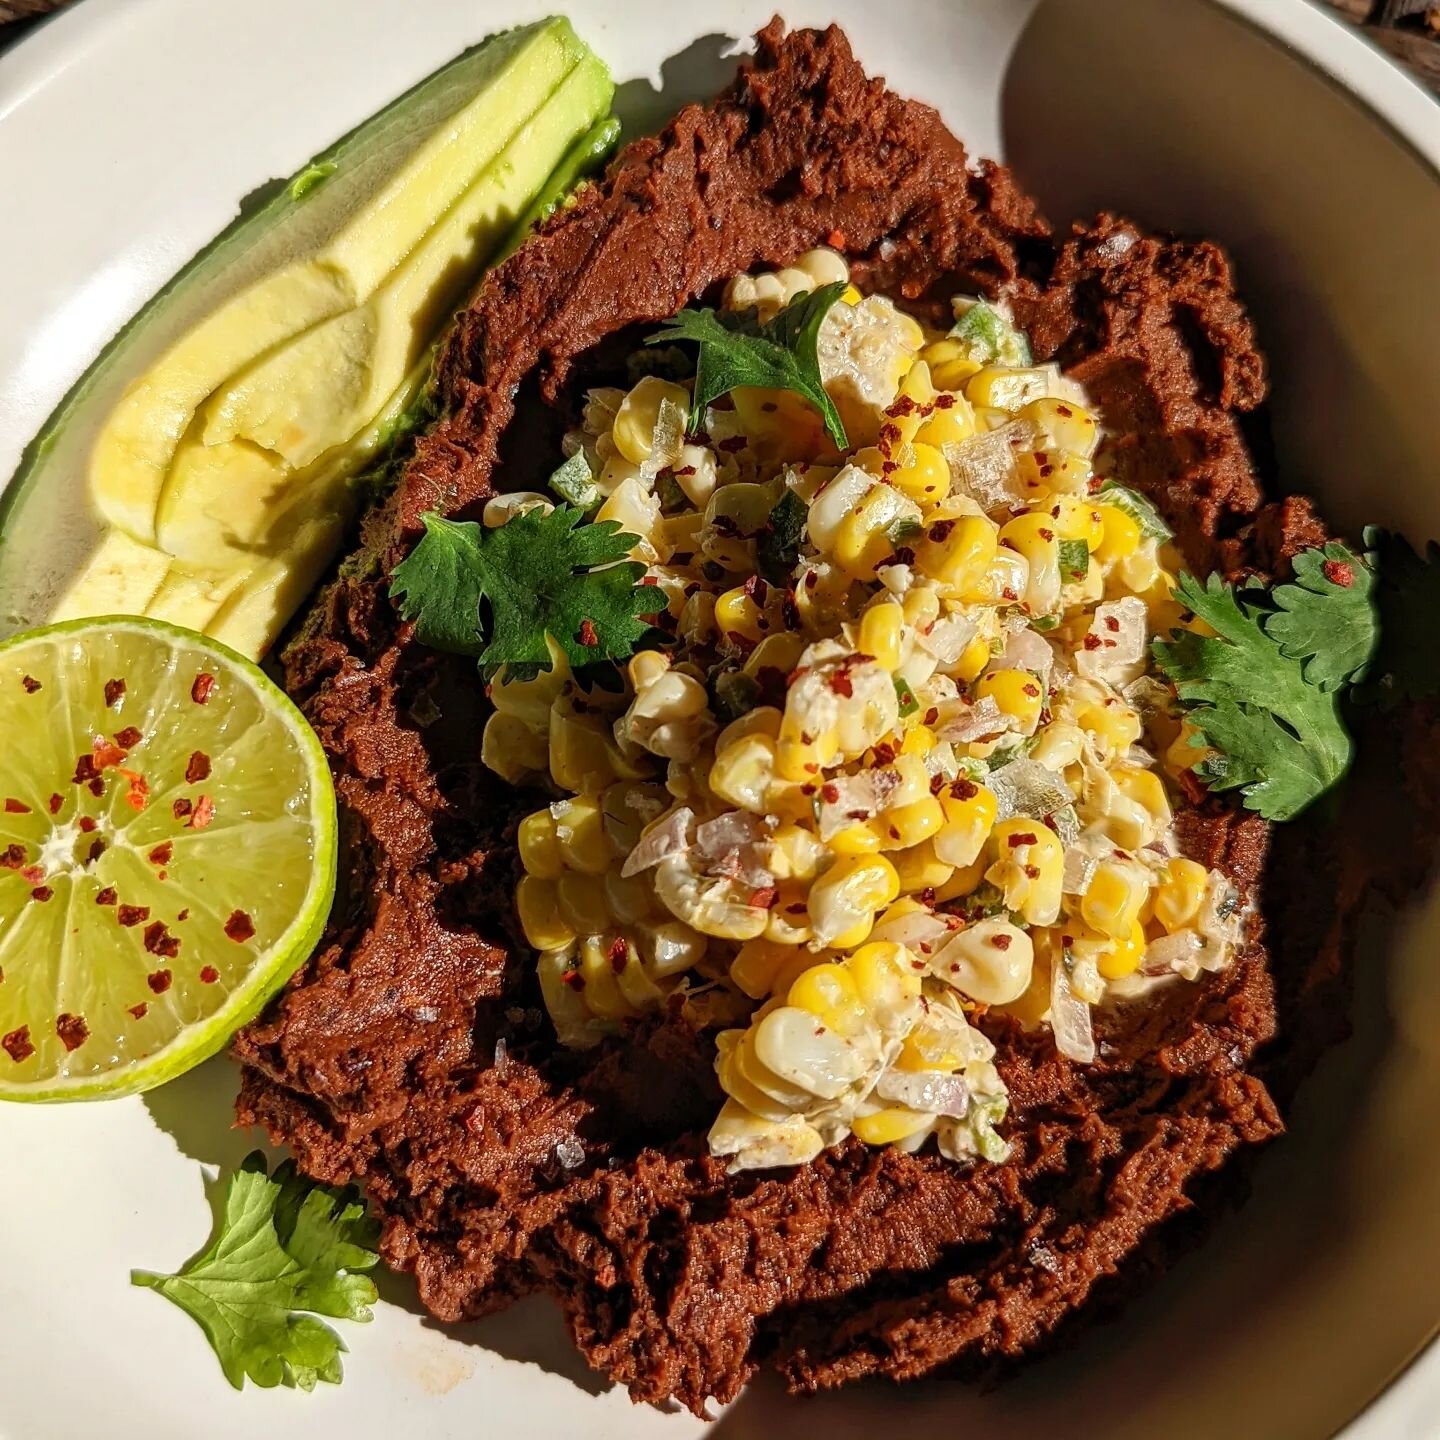 🚨 NEW DIP ALERT 🚨

Our Ancho Black Bean dip has officially launched! Another unique, flavourful dip, this recipe blends together black beans, ancho chili, onion, lime juice, avocado oil, garlic (obvi), cumin, tarragon and sea salt. Whether the star